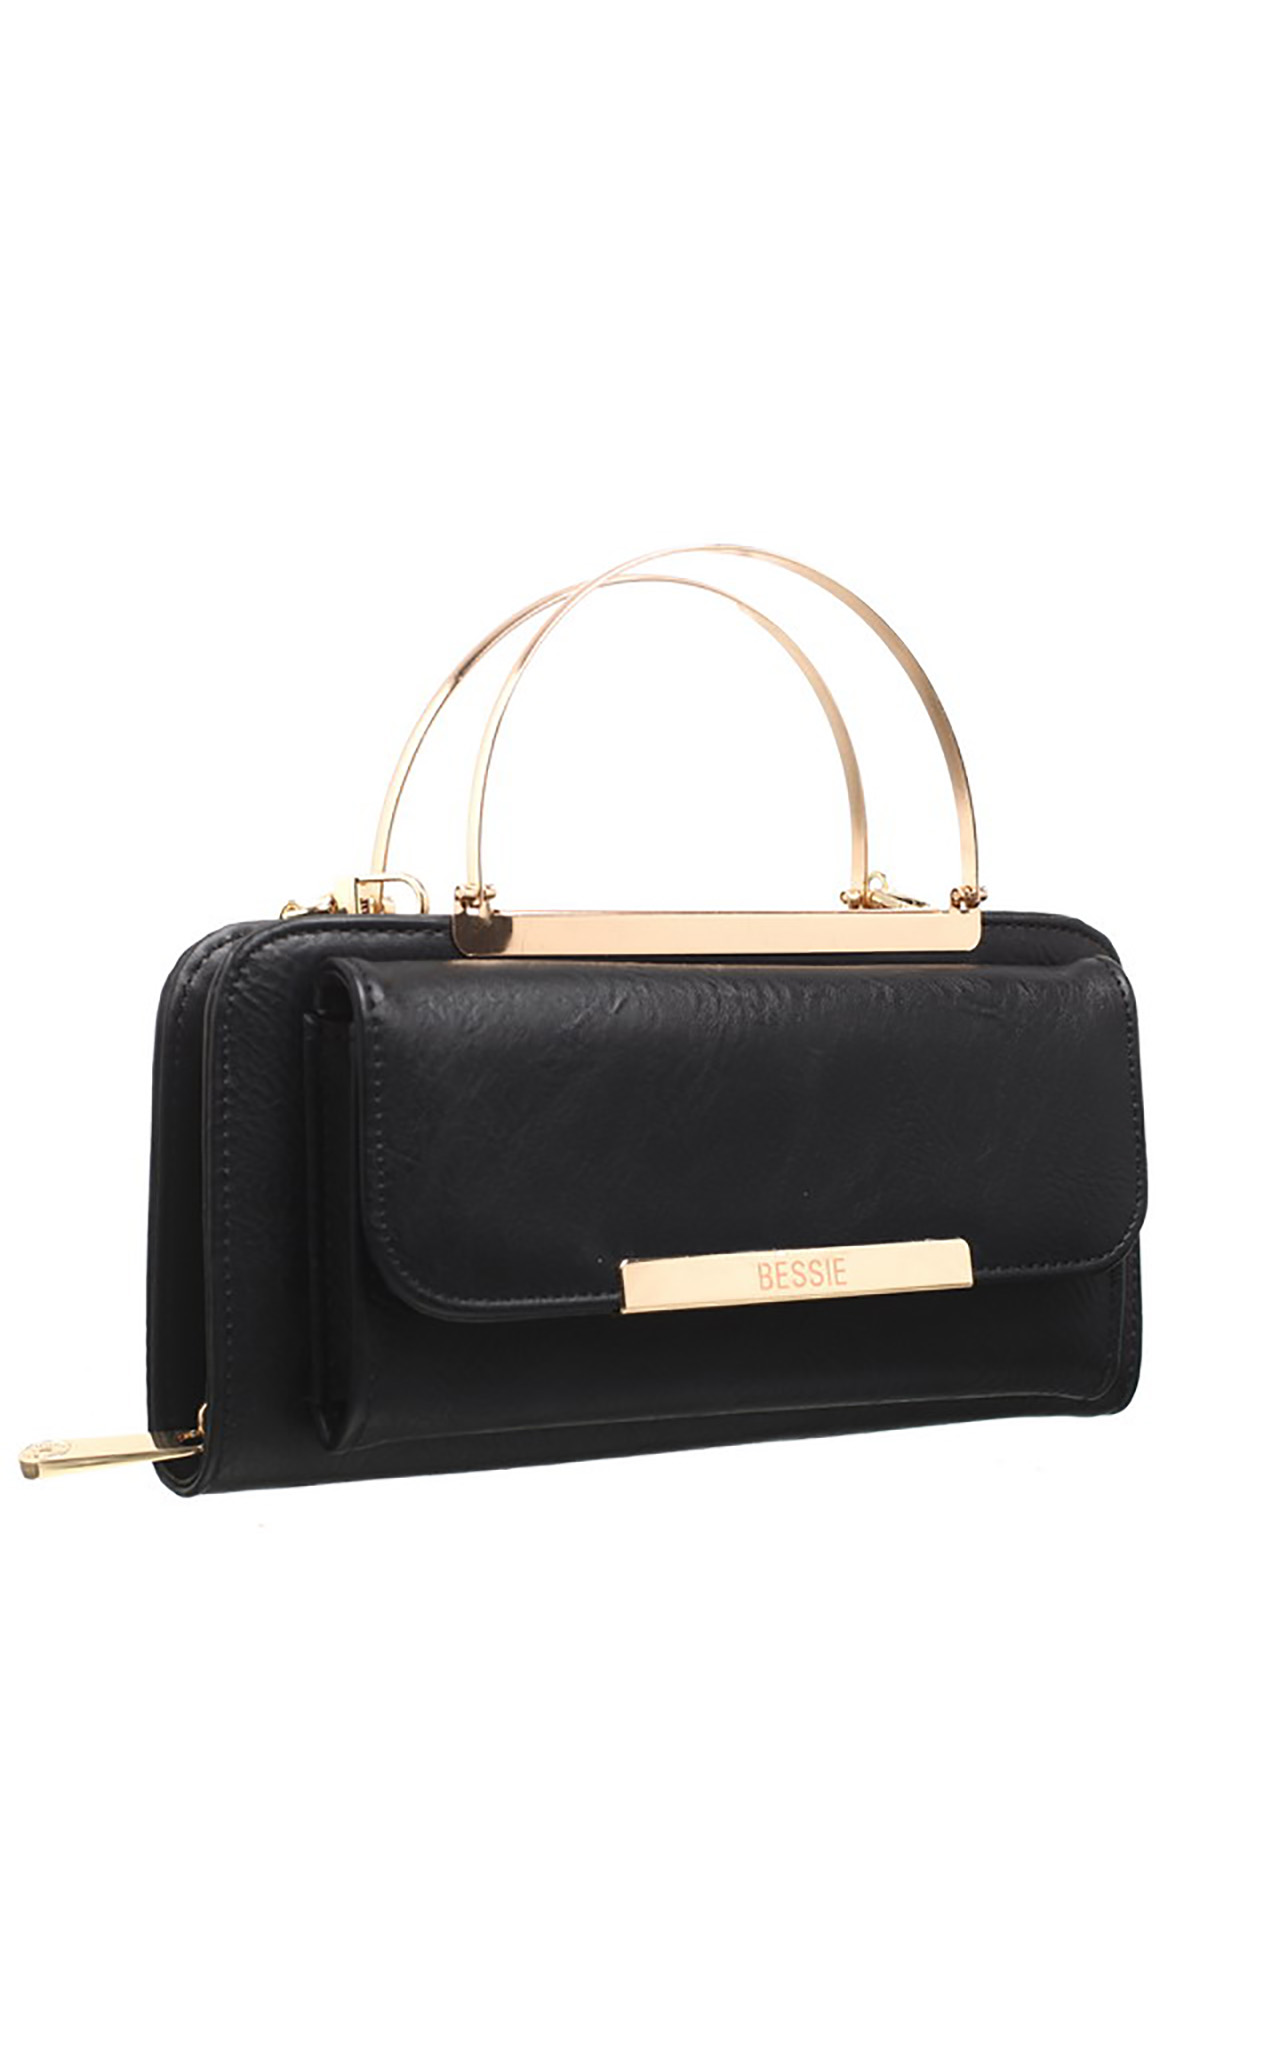 Bessie London – Perfectly on-trend and practical,shop the Bessie